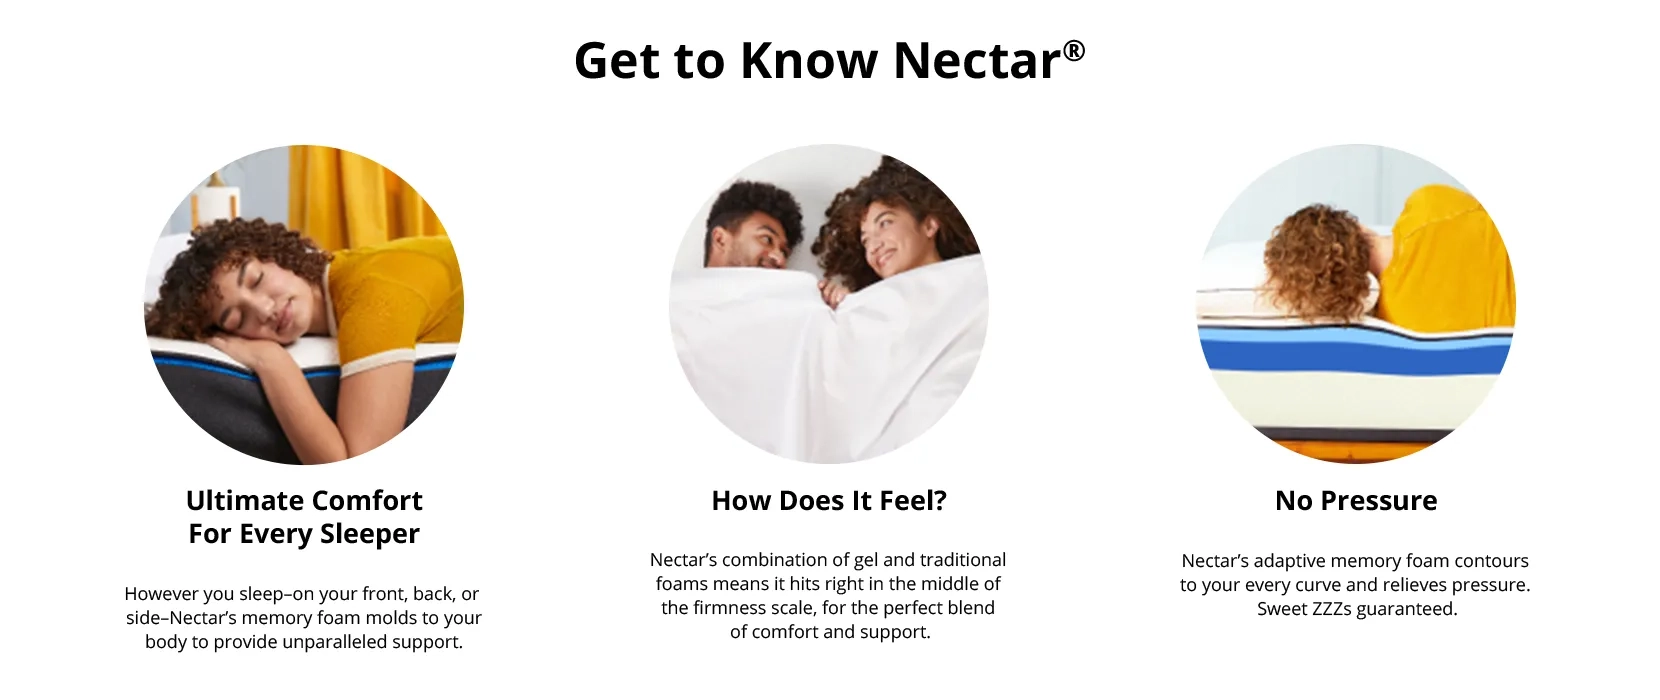 Nectar_LandingPage_TileSection_1_SW_1660x700.png